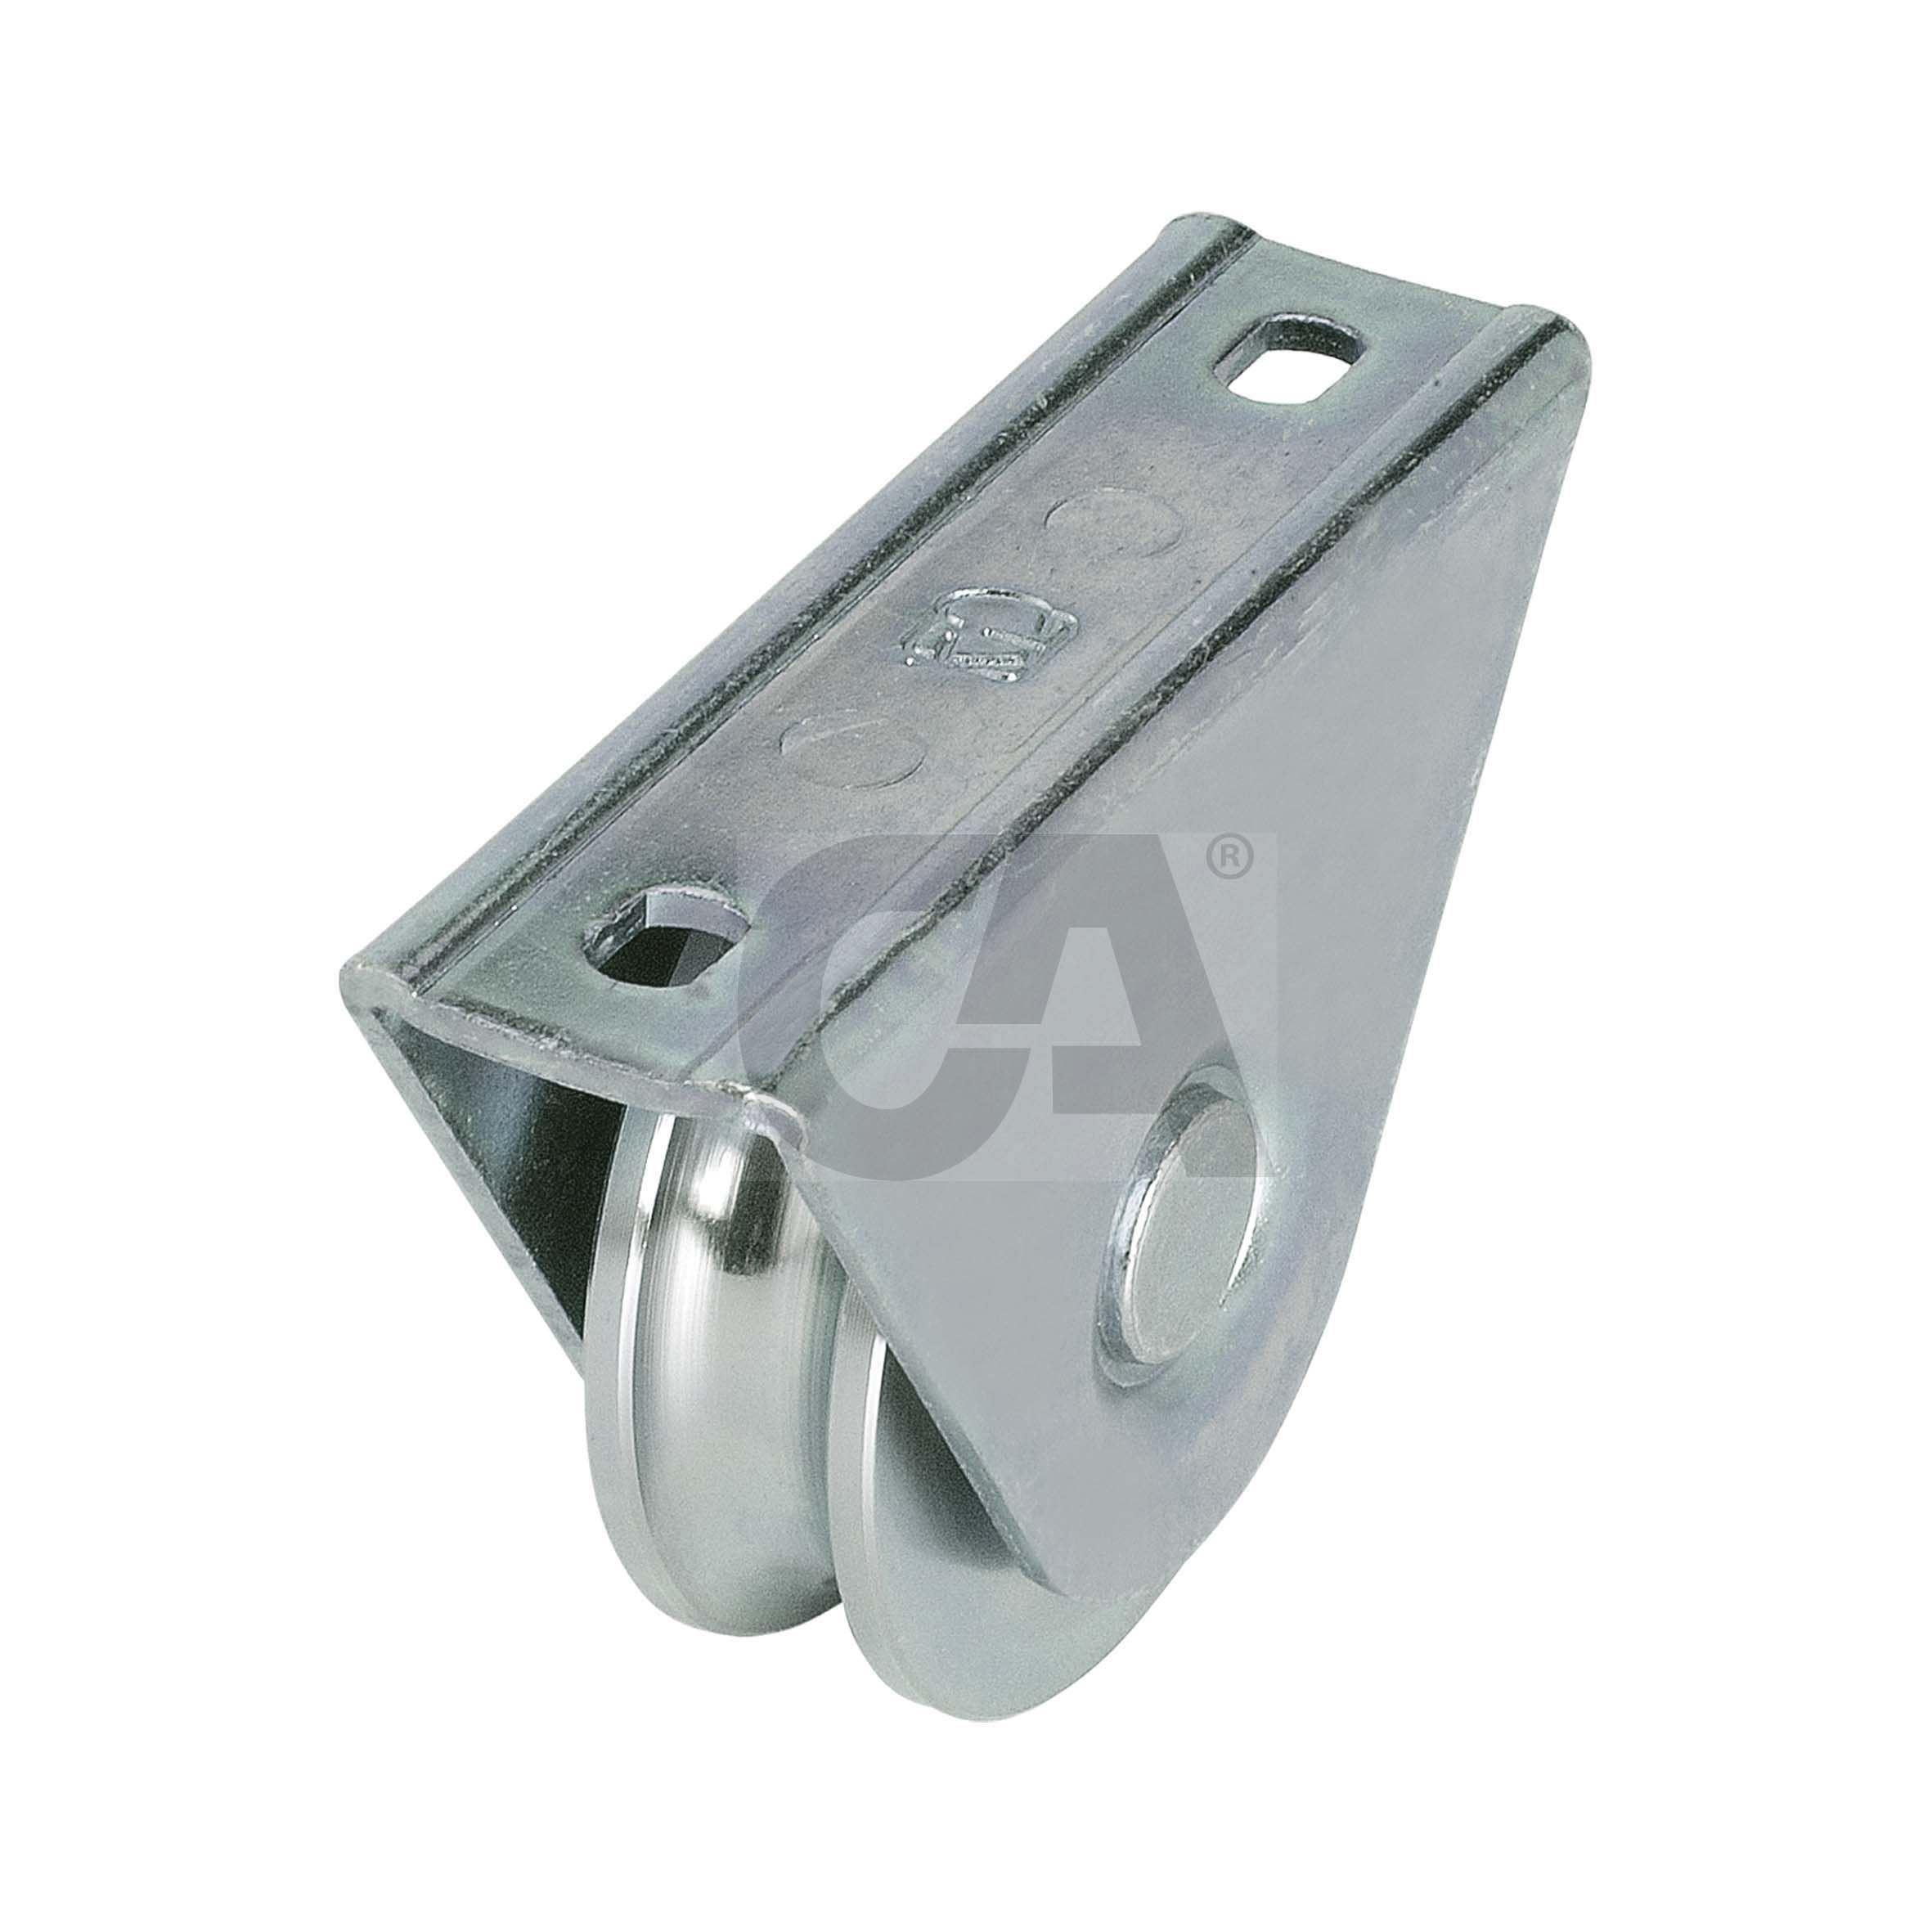 Sliding Gate Wheels with Outside Support – Round groove